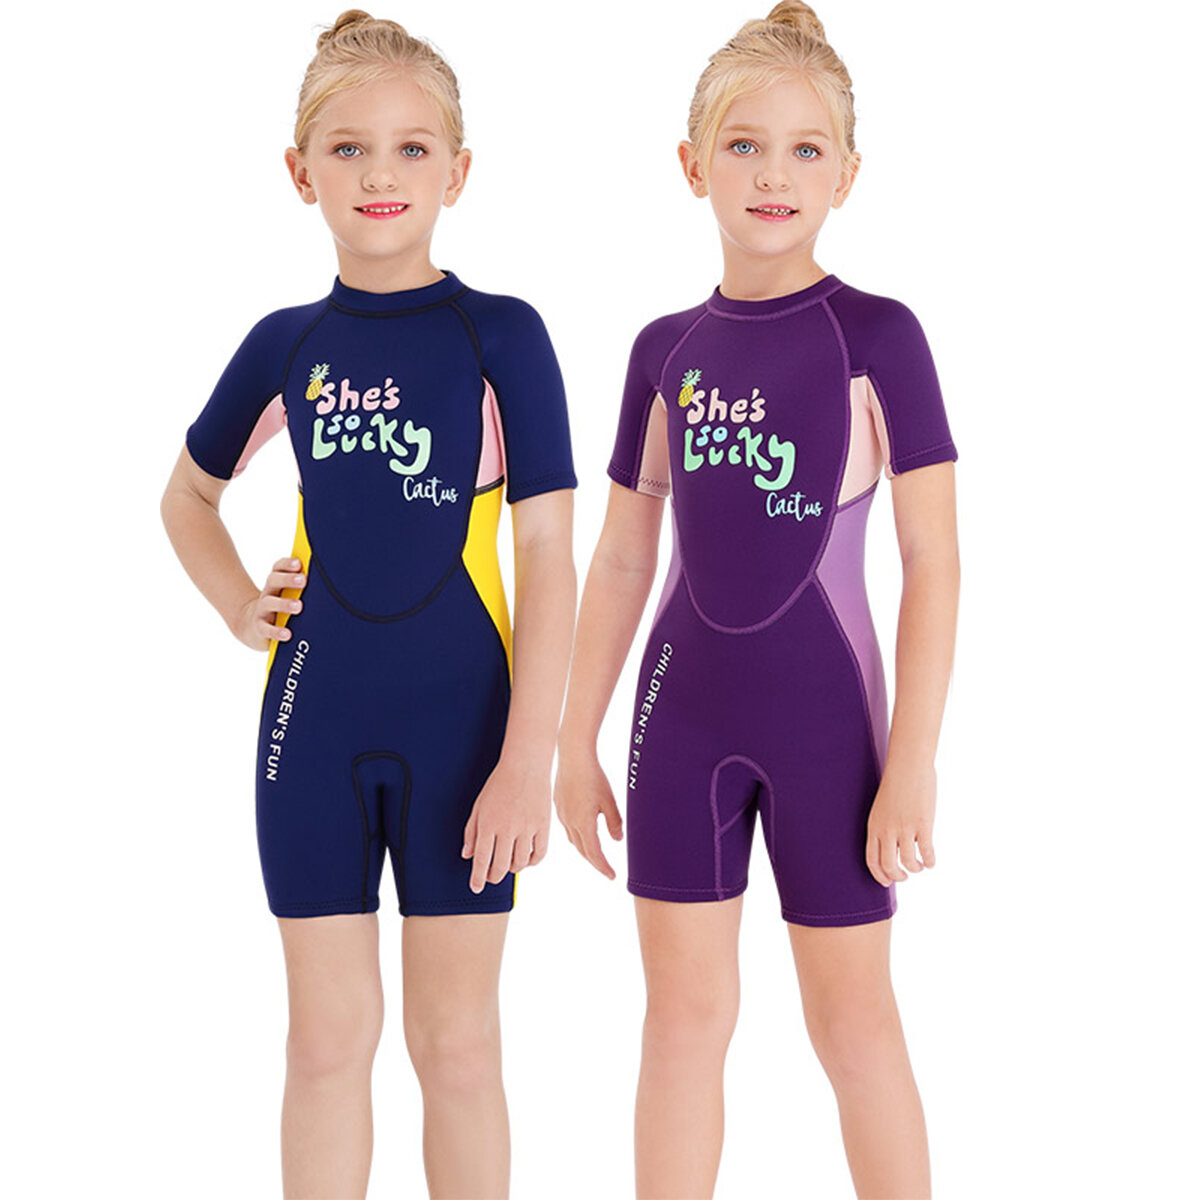 2.5mm Neoprene Short Sleeve Kids Wetsuit UPF50+ Swimming Diving Toddler Child Youth Wet Suits for 2-12 Years Old